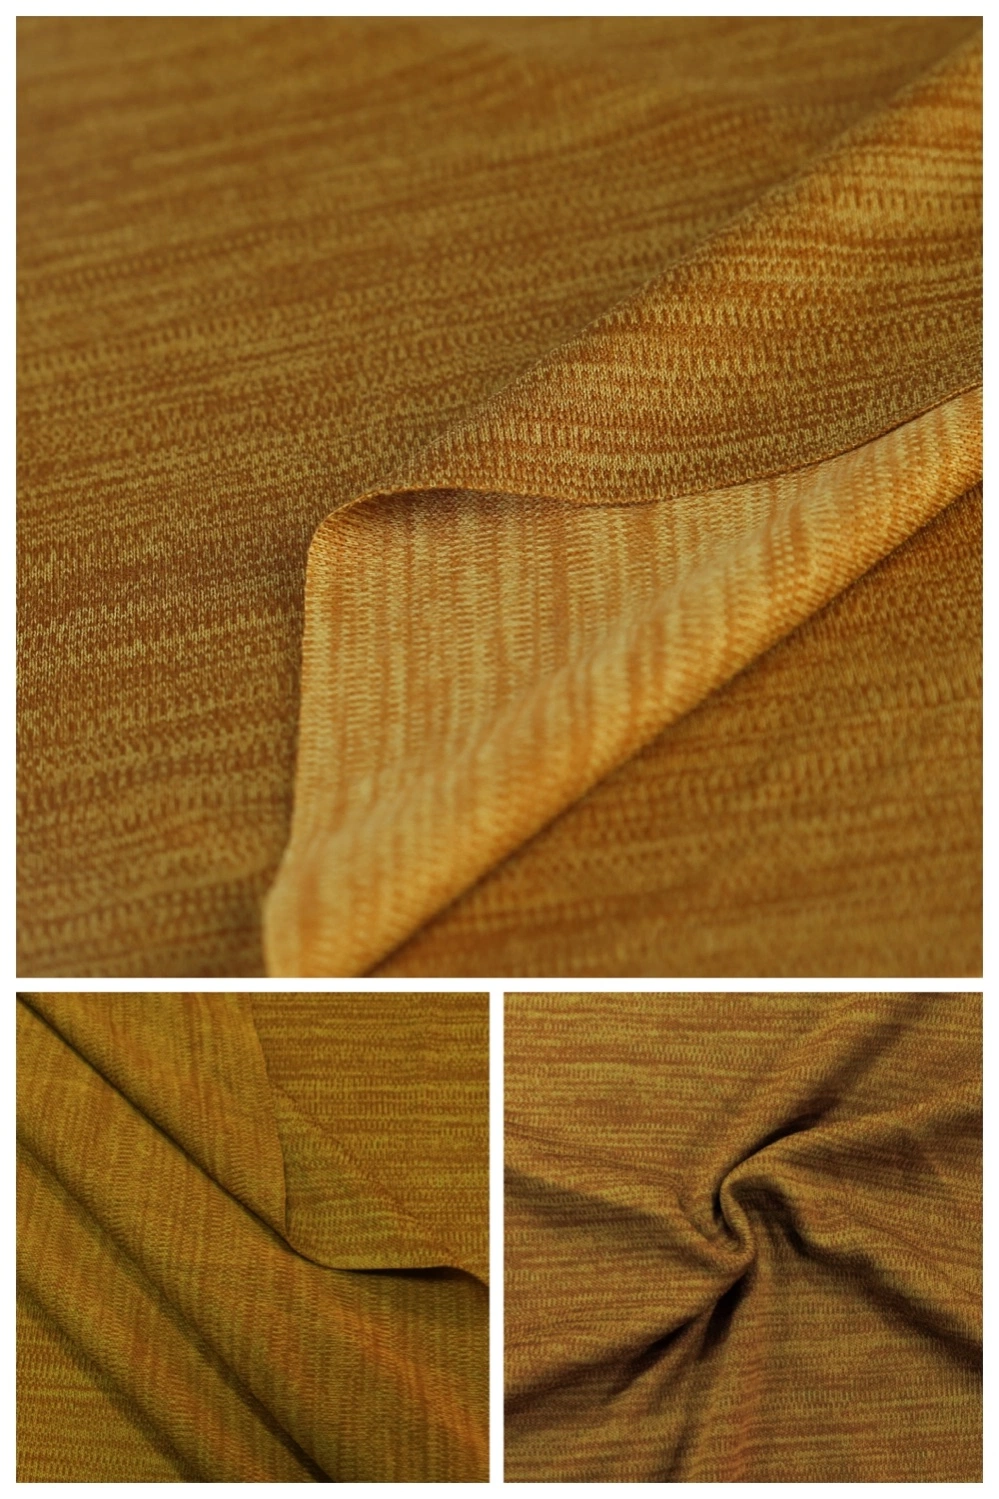 Quick-Dry Cation Polyester Interlock Knitted Fabric for Sportswear